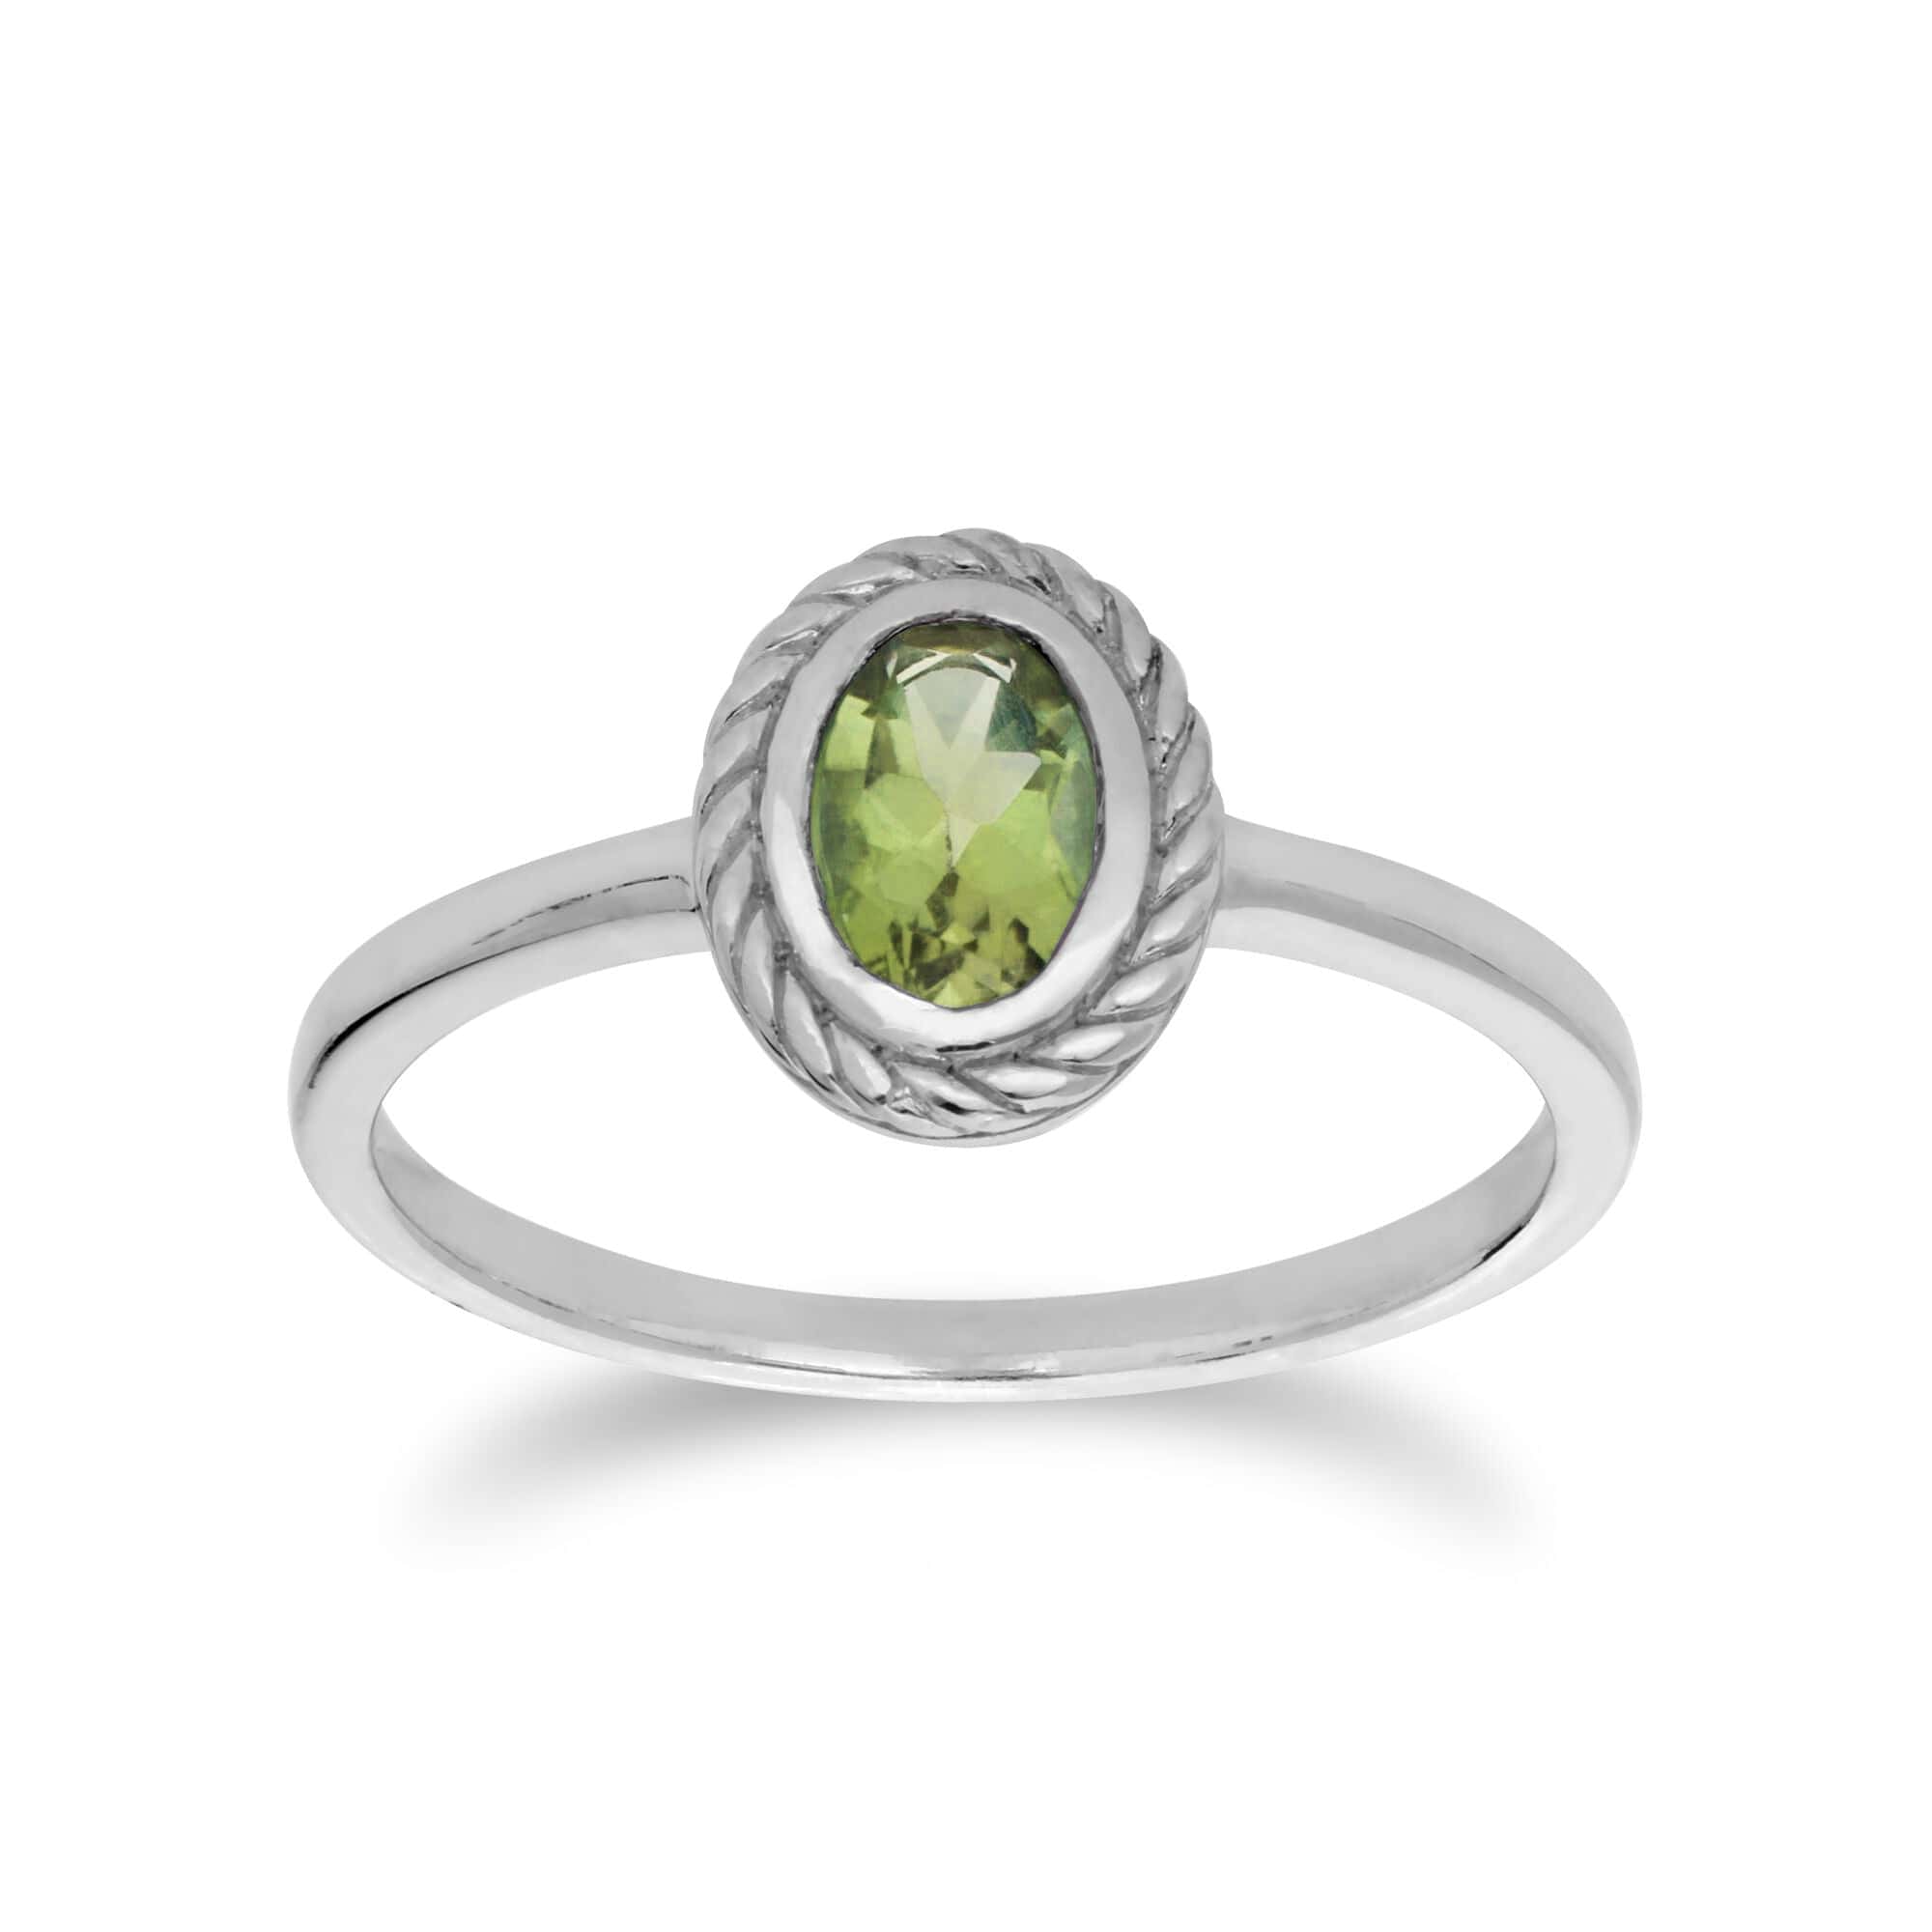 Classic Oval Peridot Rope Design Ring in 925 Sterling Silver - Gemondo